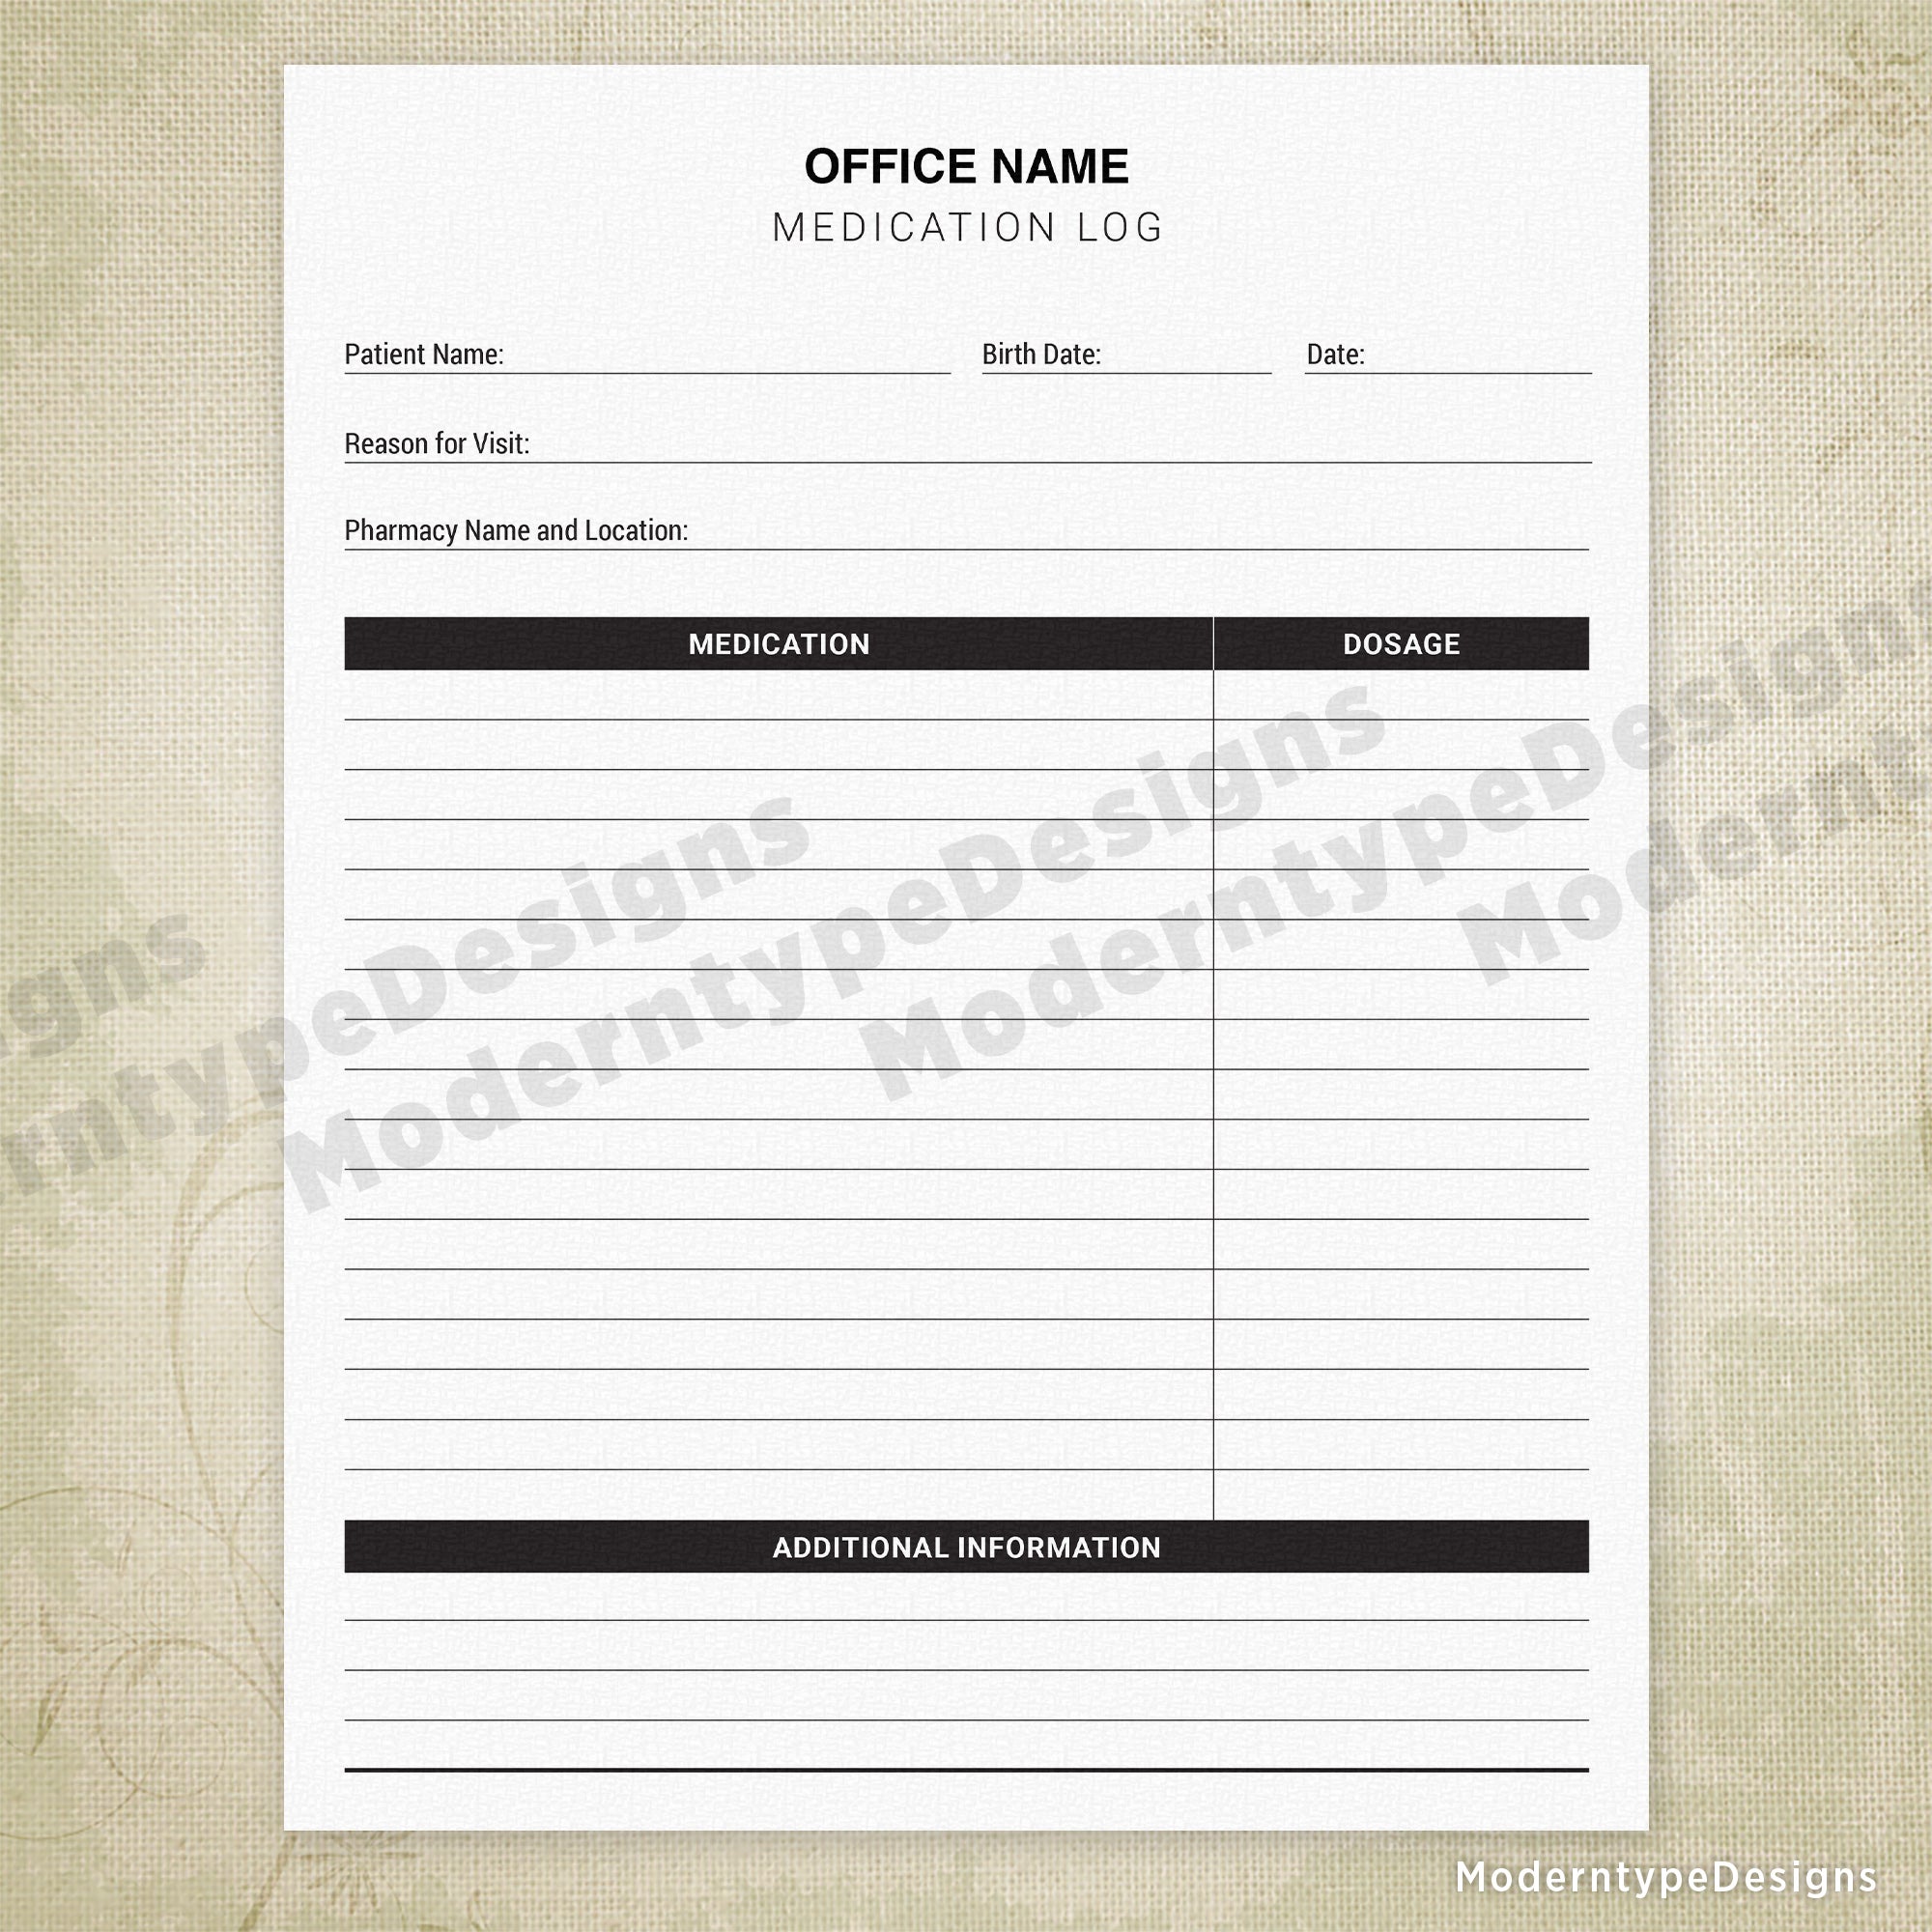 Medication Log Printable Form for Offices, Personalized